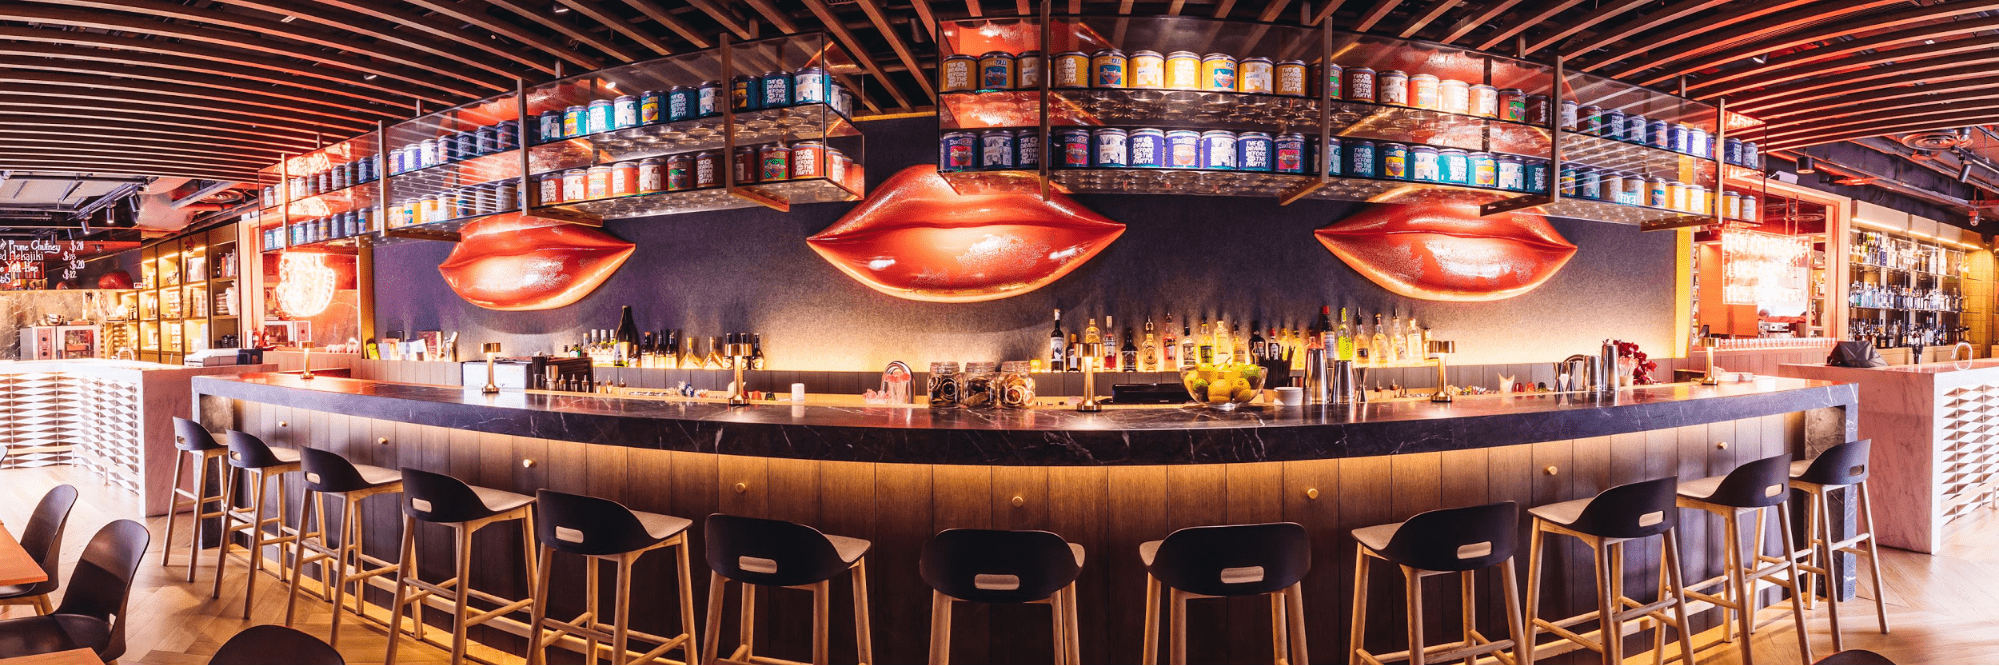 red tail bar